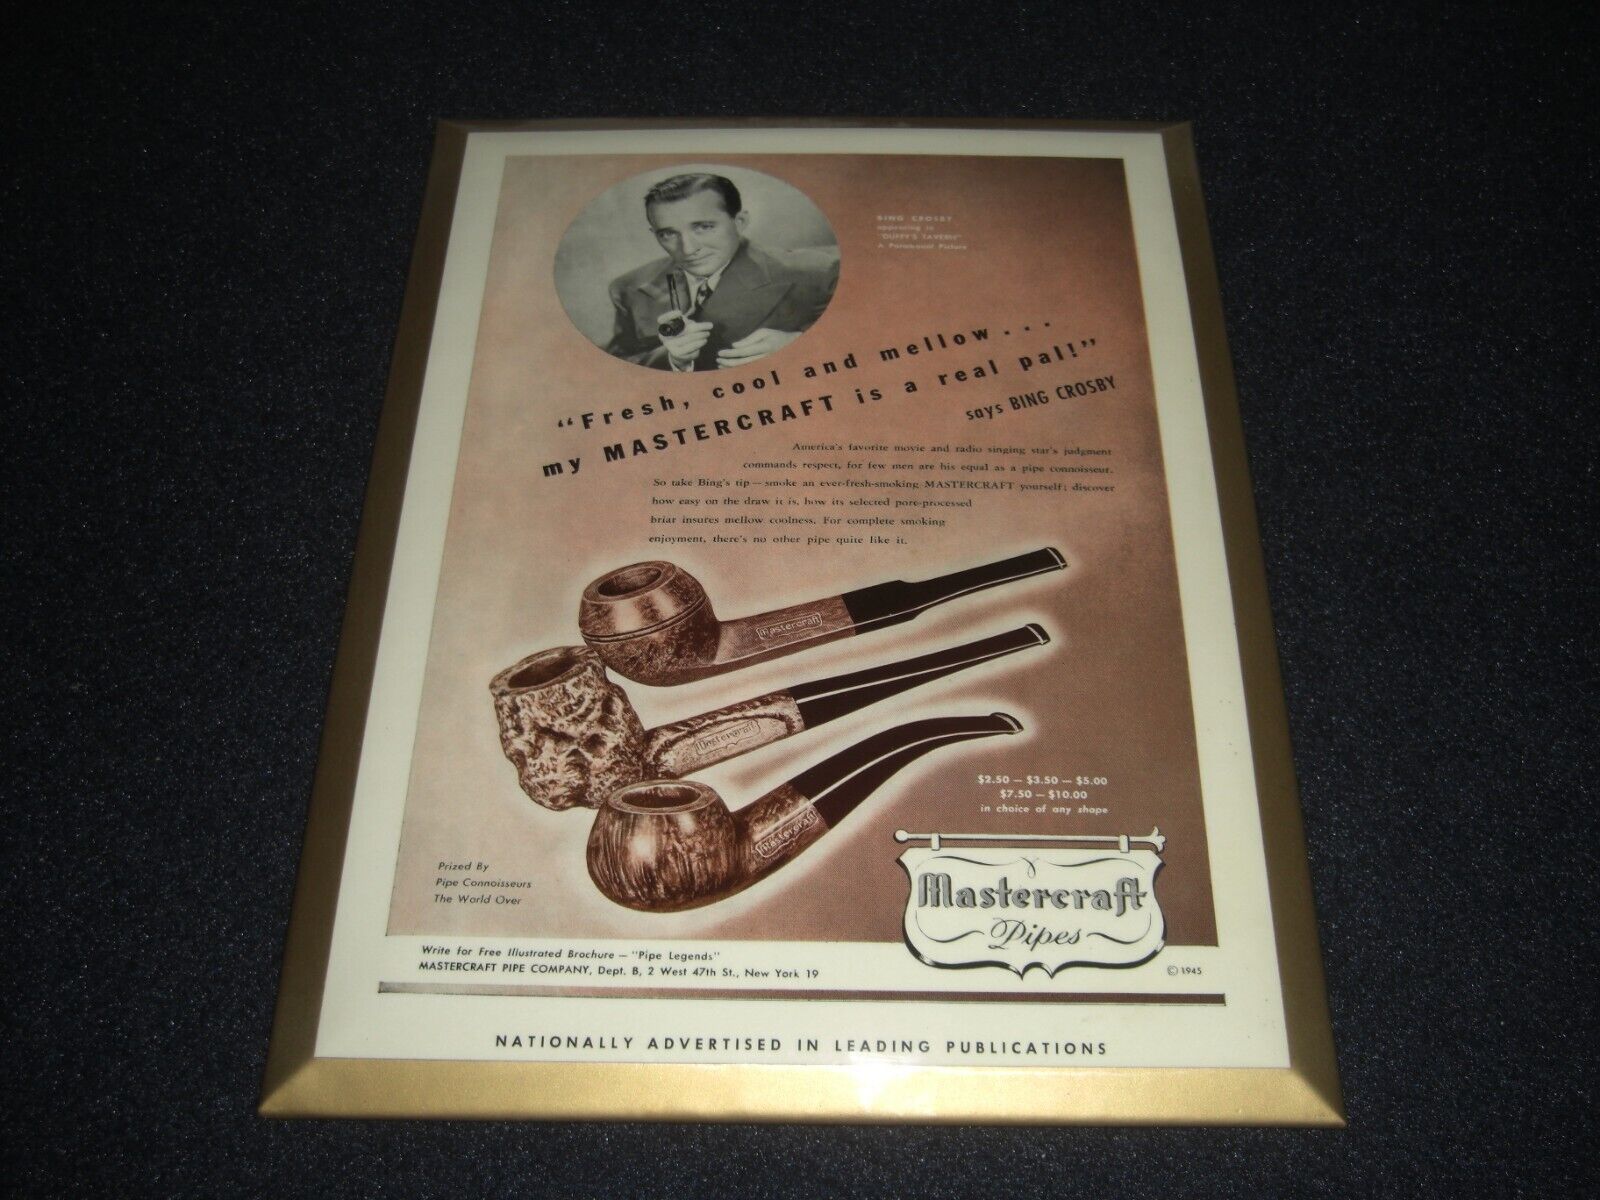 Mastercraft Pipes Advertising with Bing Crosby Metal with a Mylar Overlay 1945